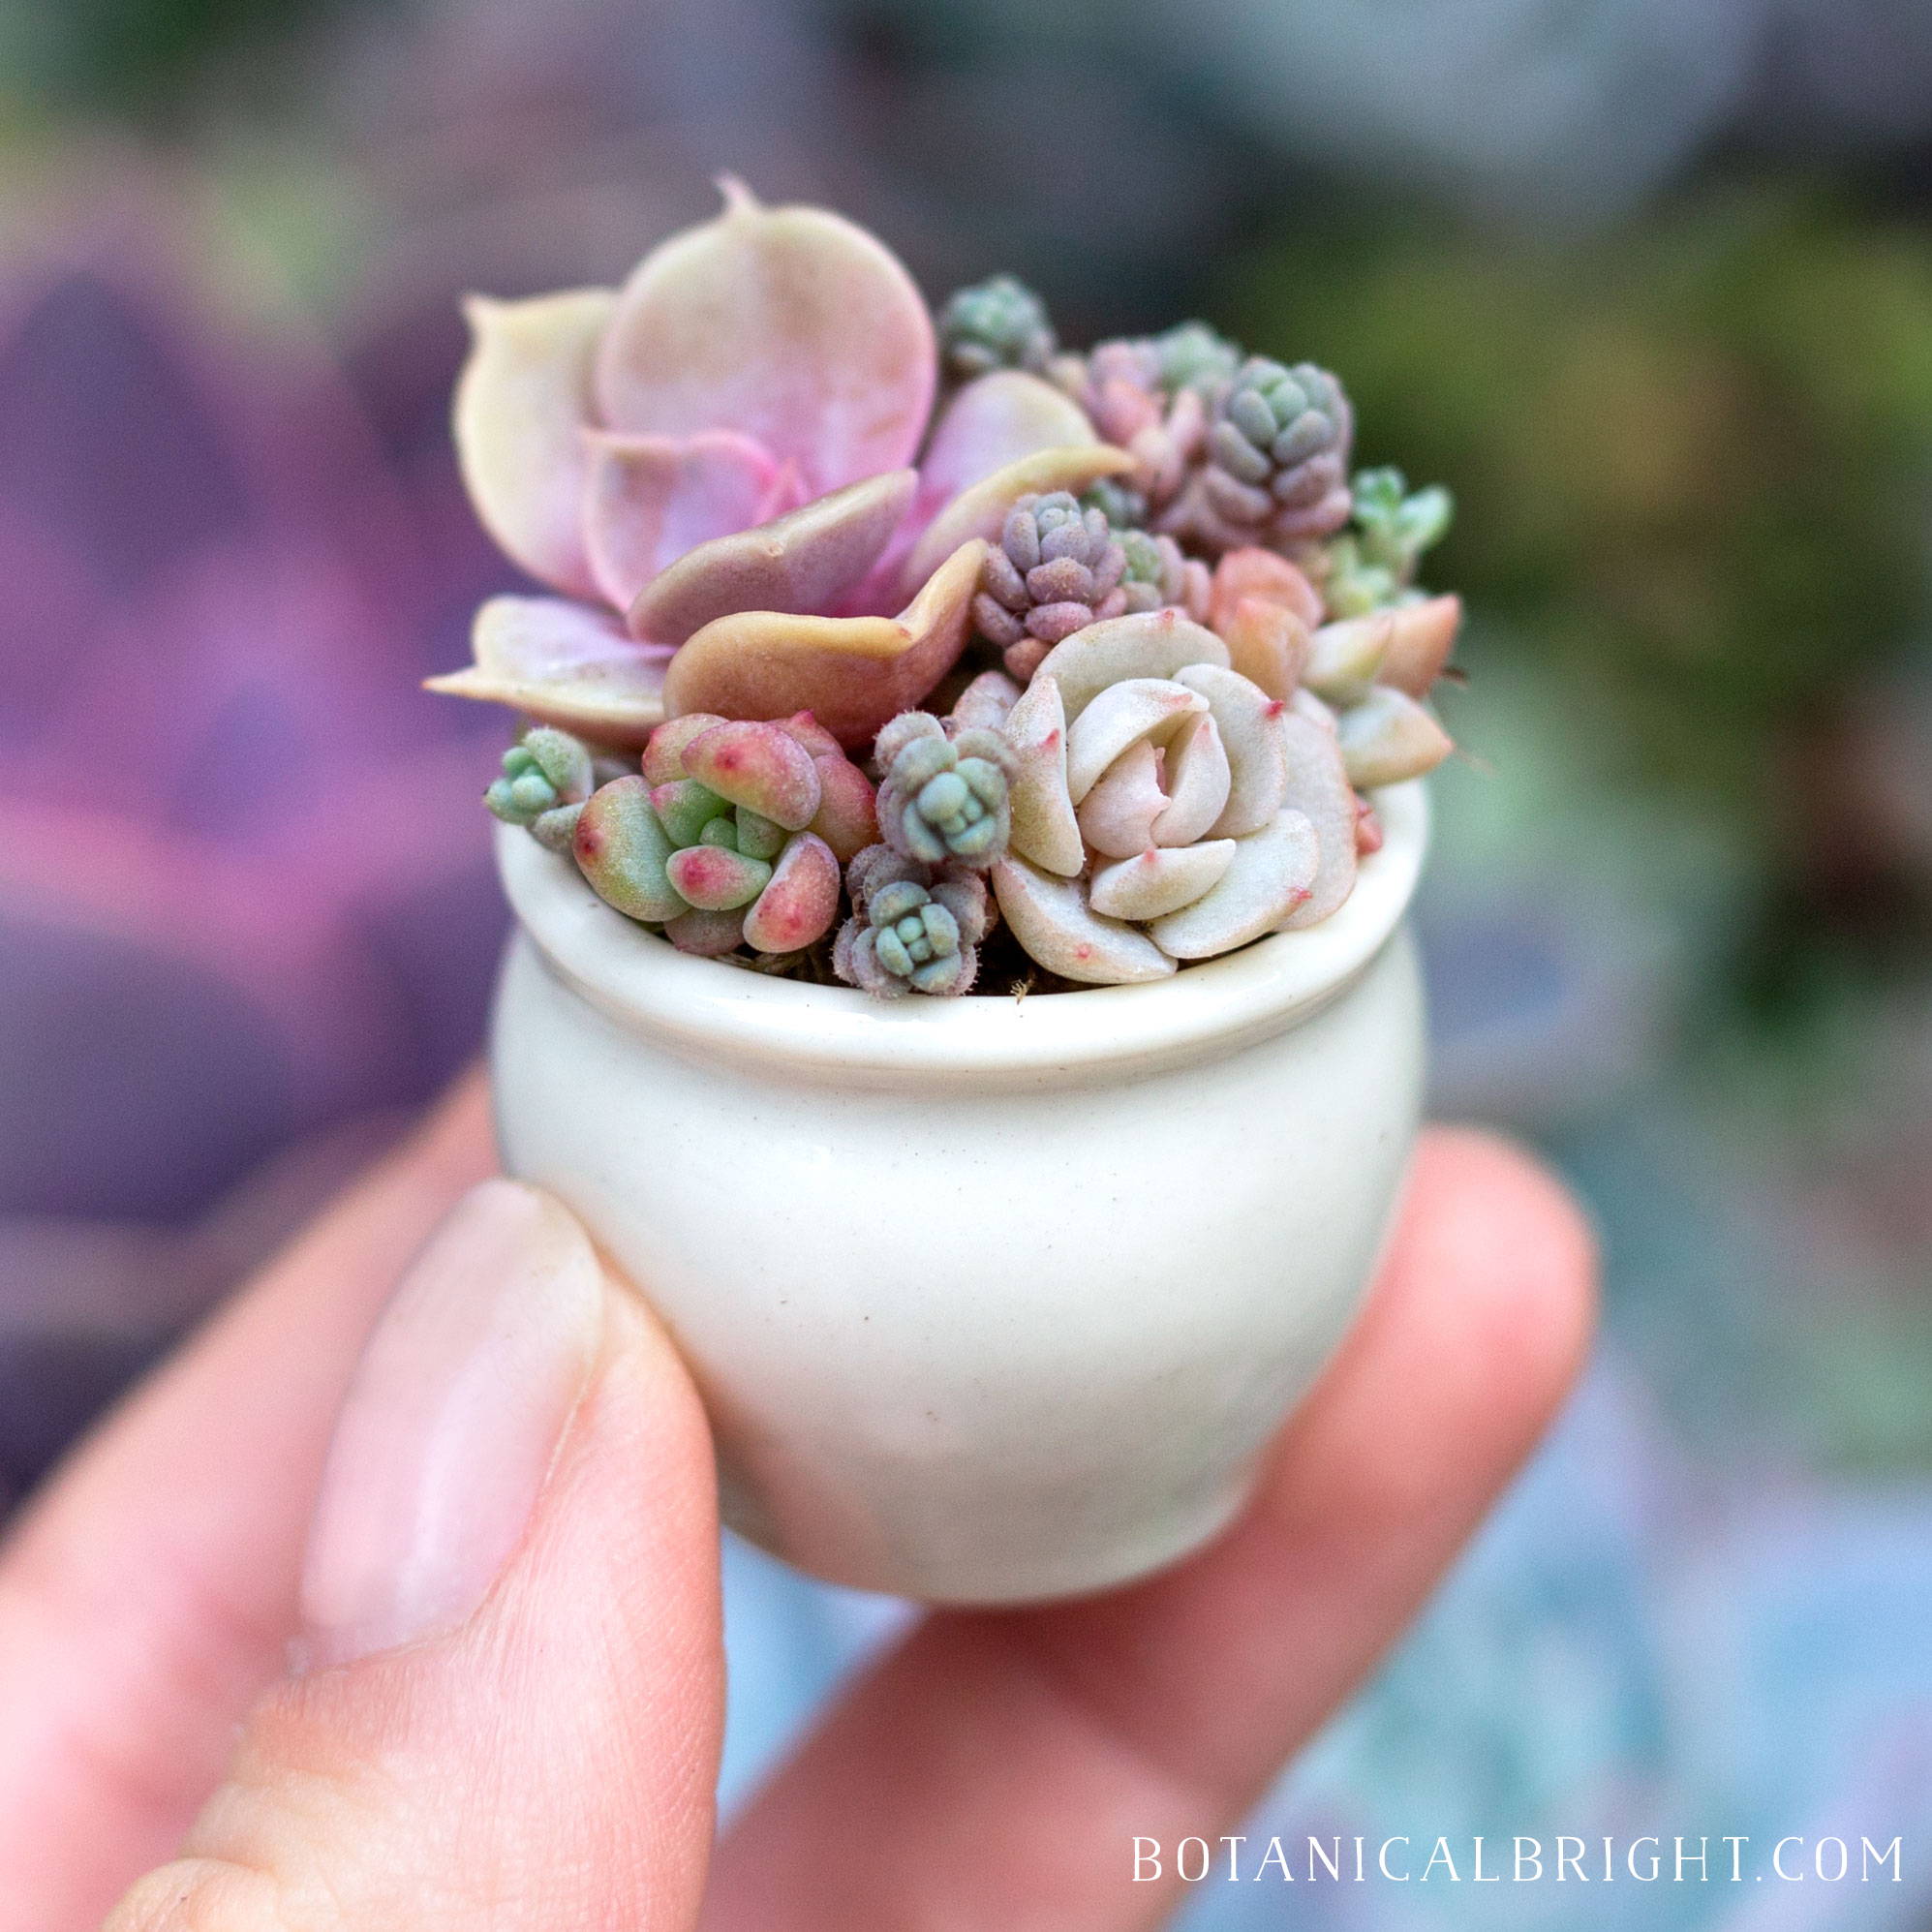 Tiny Plant Gallery – Botanical Bright - Add a Little Beauty to Your ...